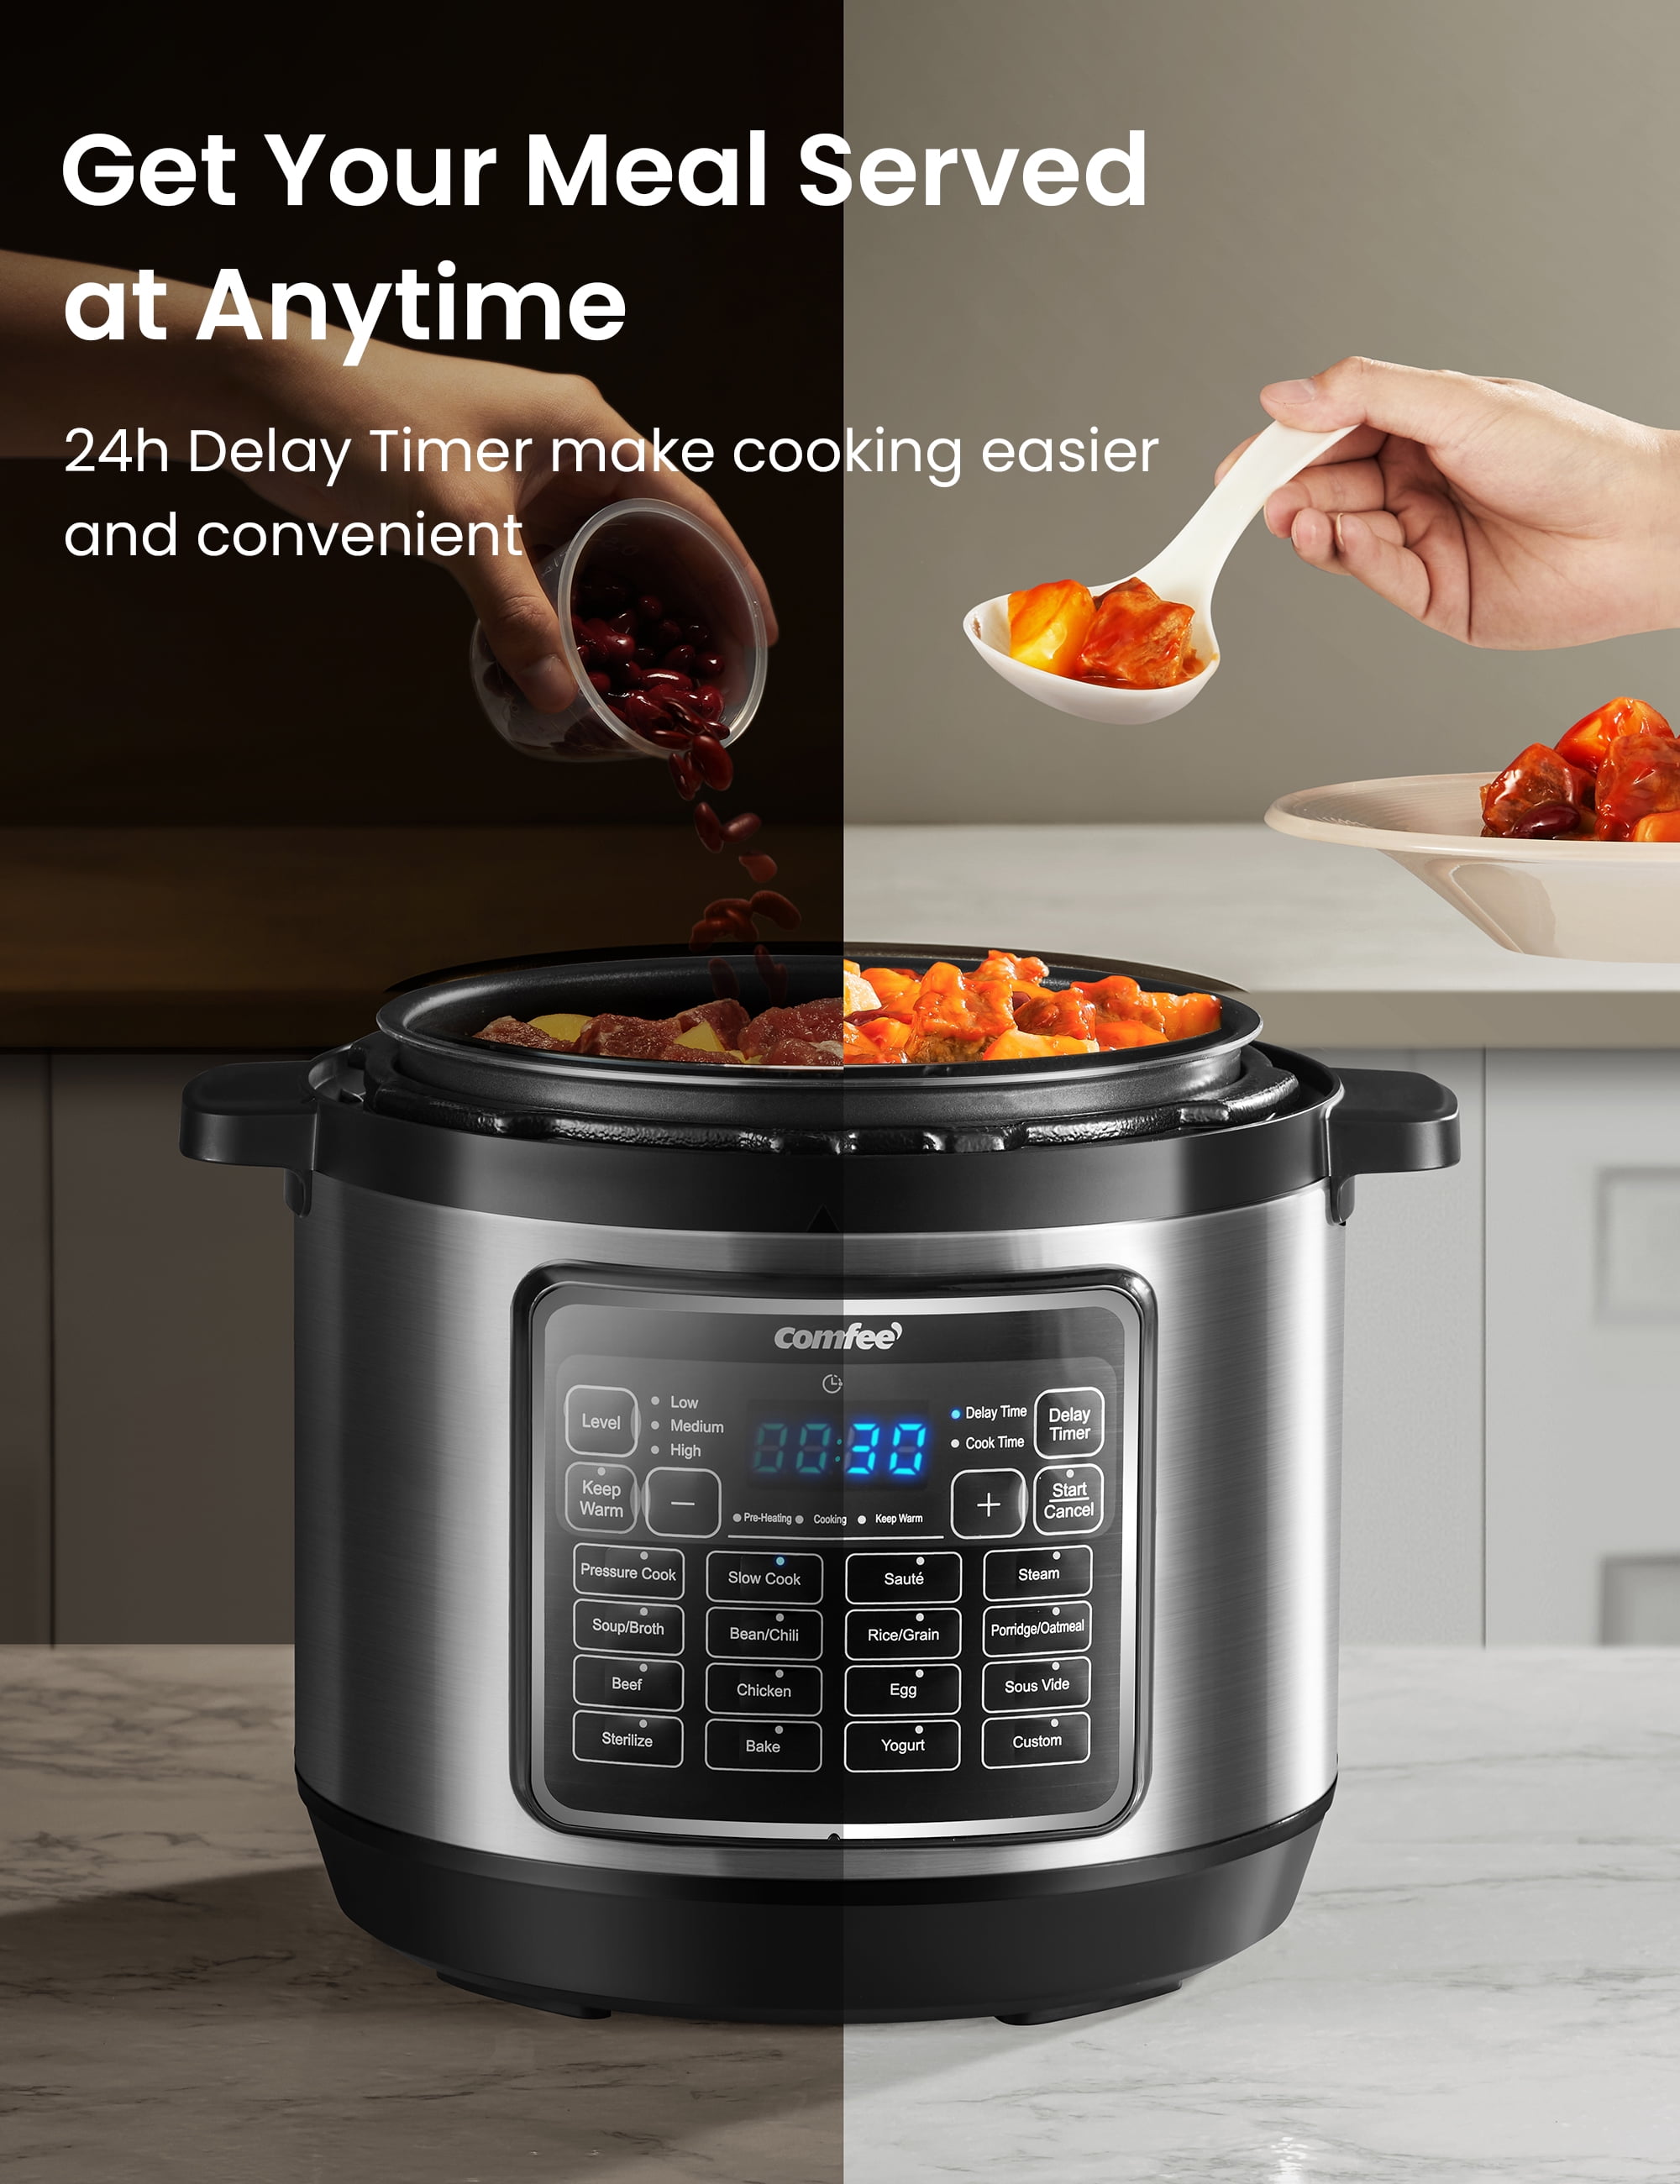 COMFEE’ 6 Quart Pressure Cooker 12-in-1, One Touch Kick-Start Multi-functional Programmable Slow Cooker, Rice Cooker, Steamer, Sauté Pan, Egg Cooker